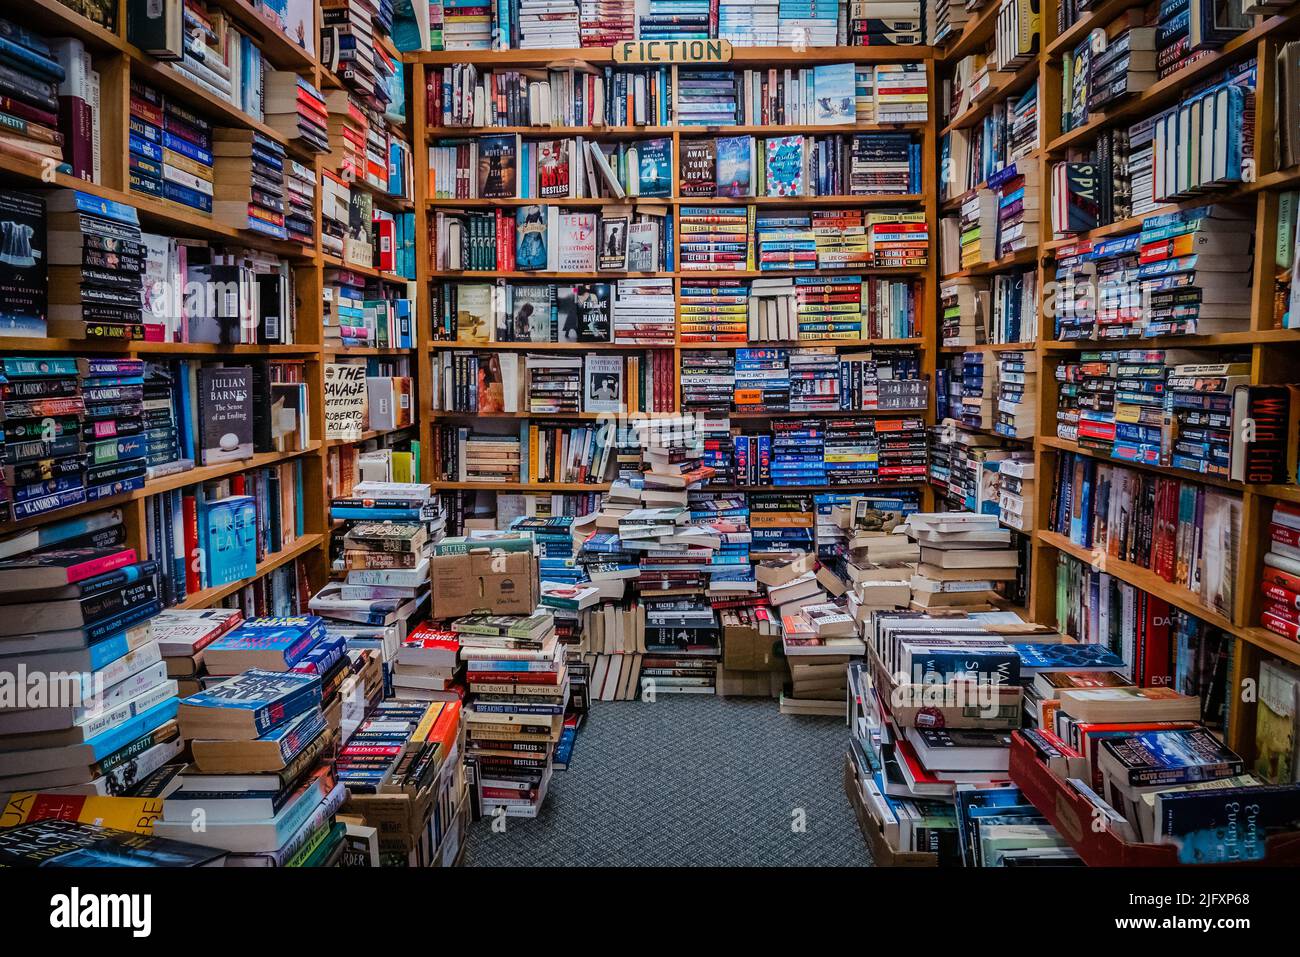 A small room filled with books on shelves and on the floor Stock Photo